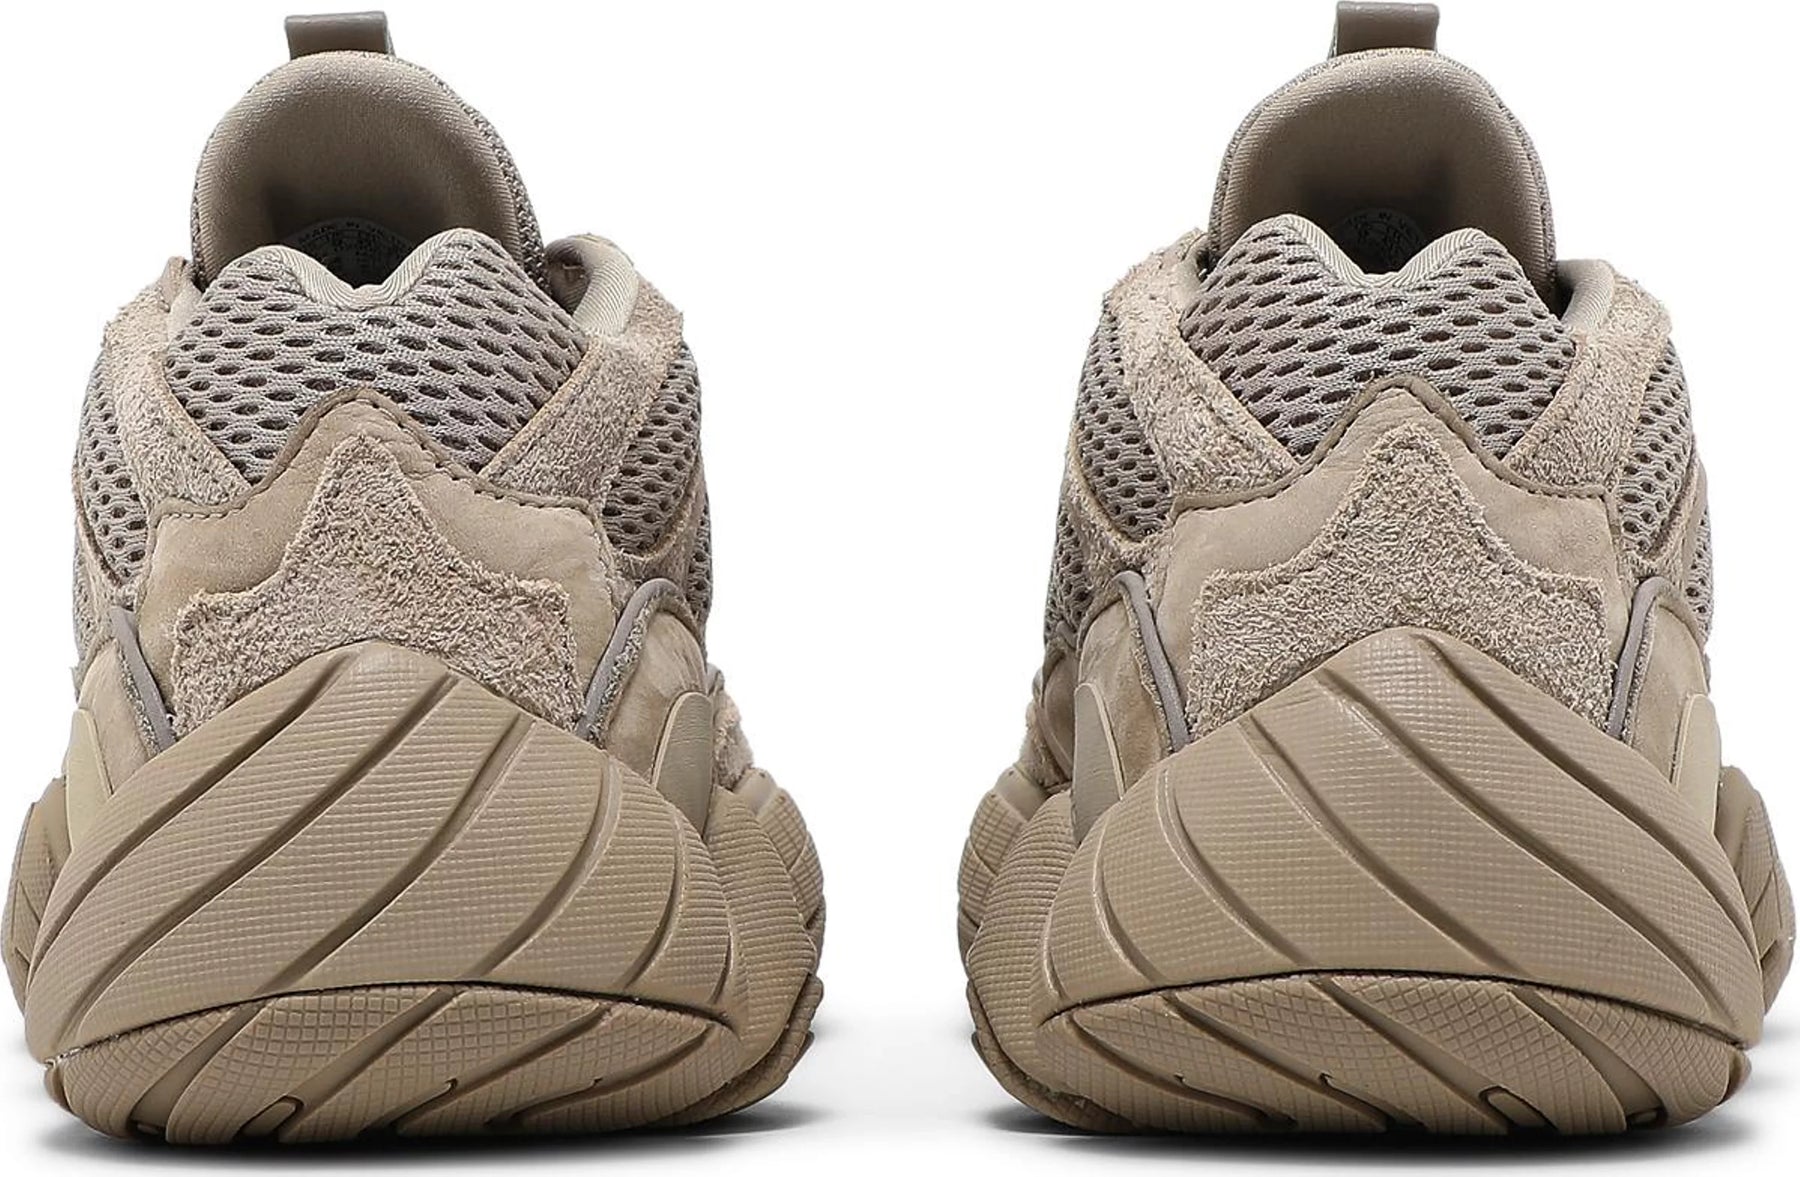 Adidas Yeezy Boost 500 "Taupe Light"